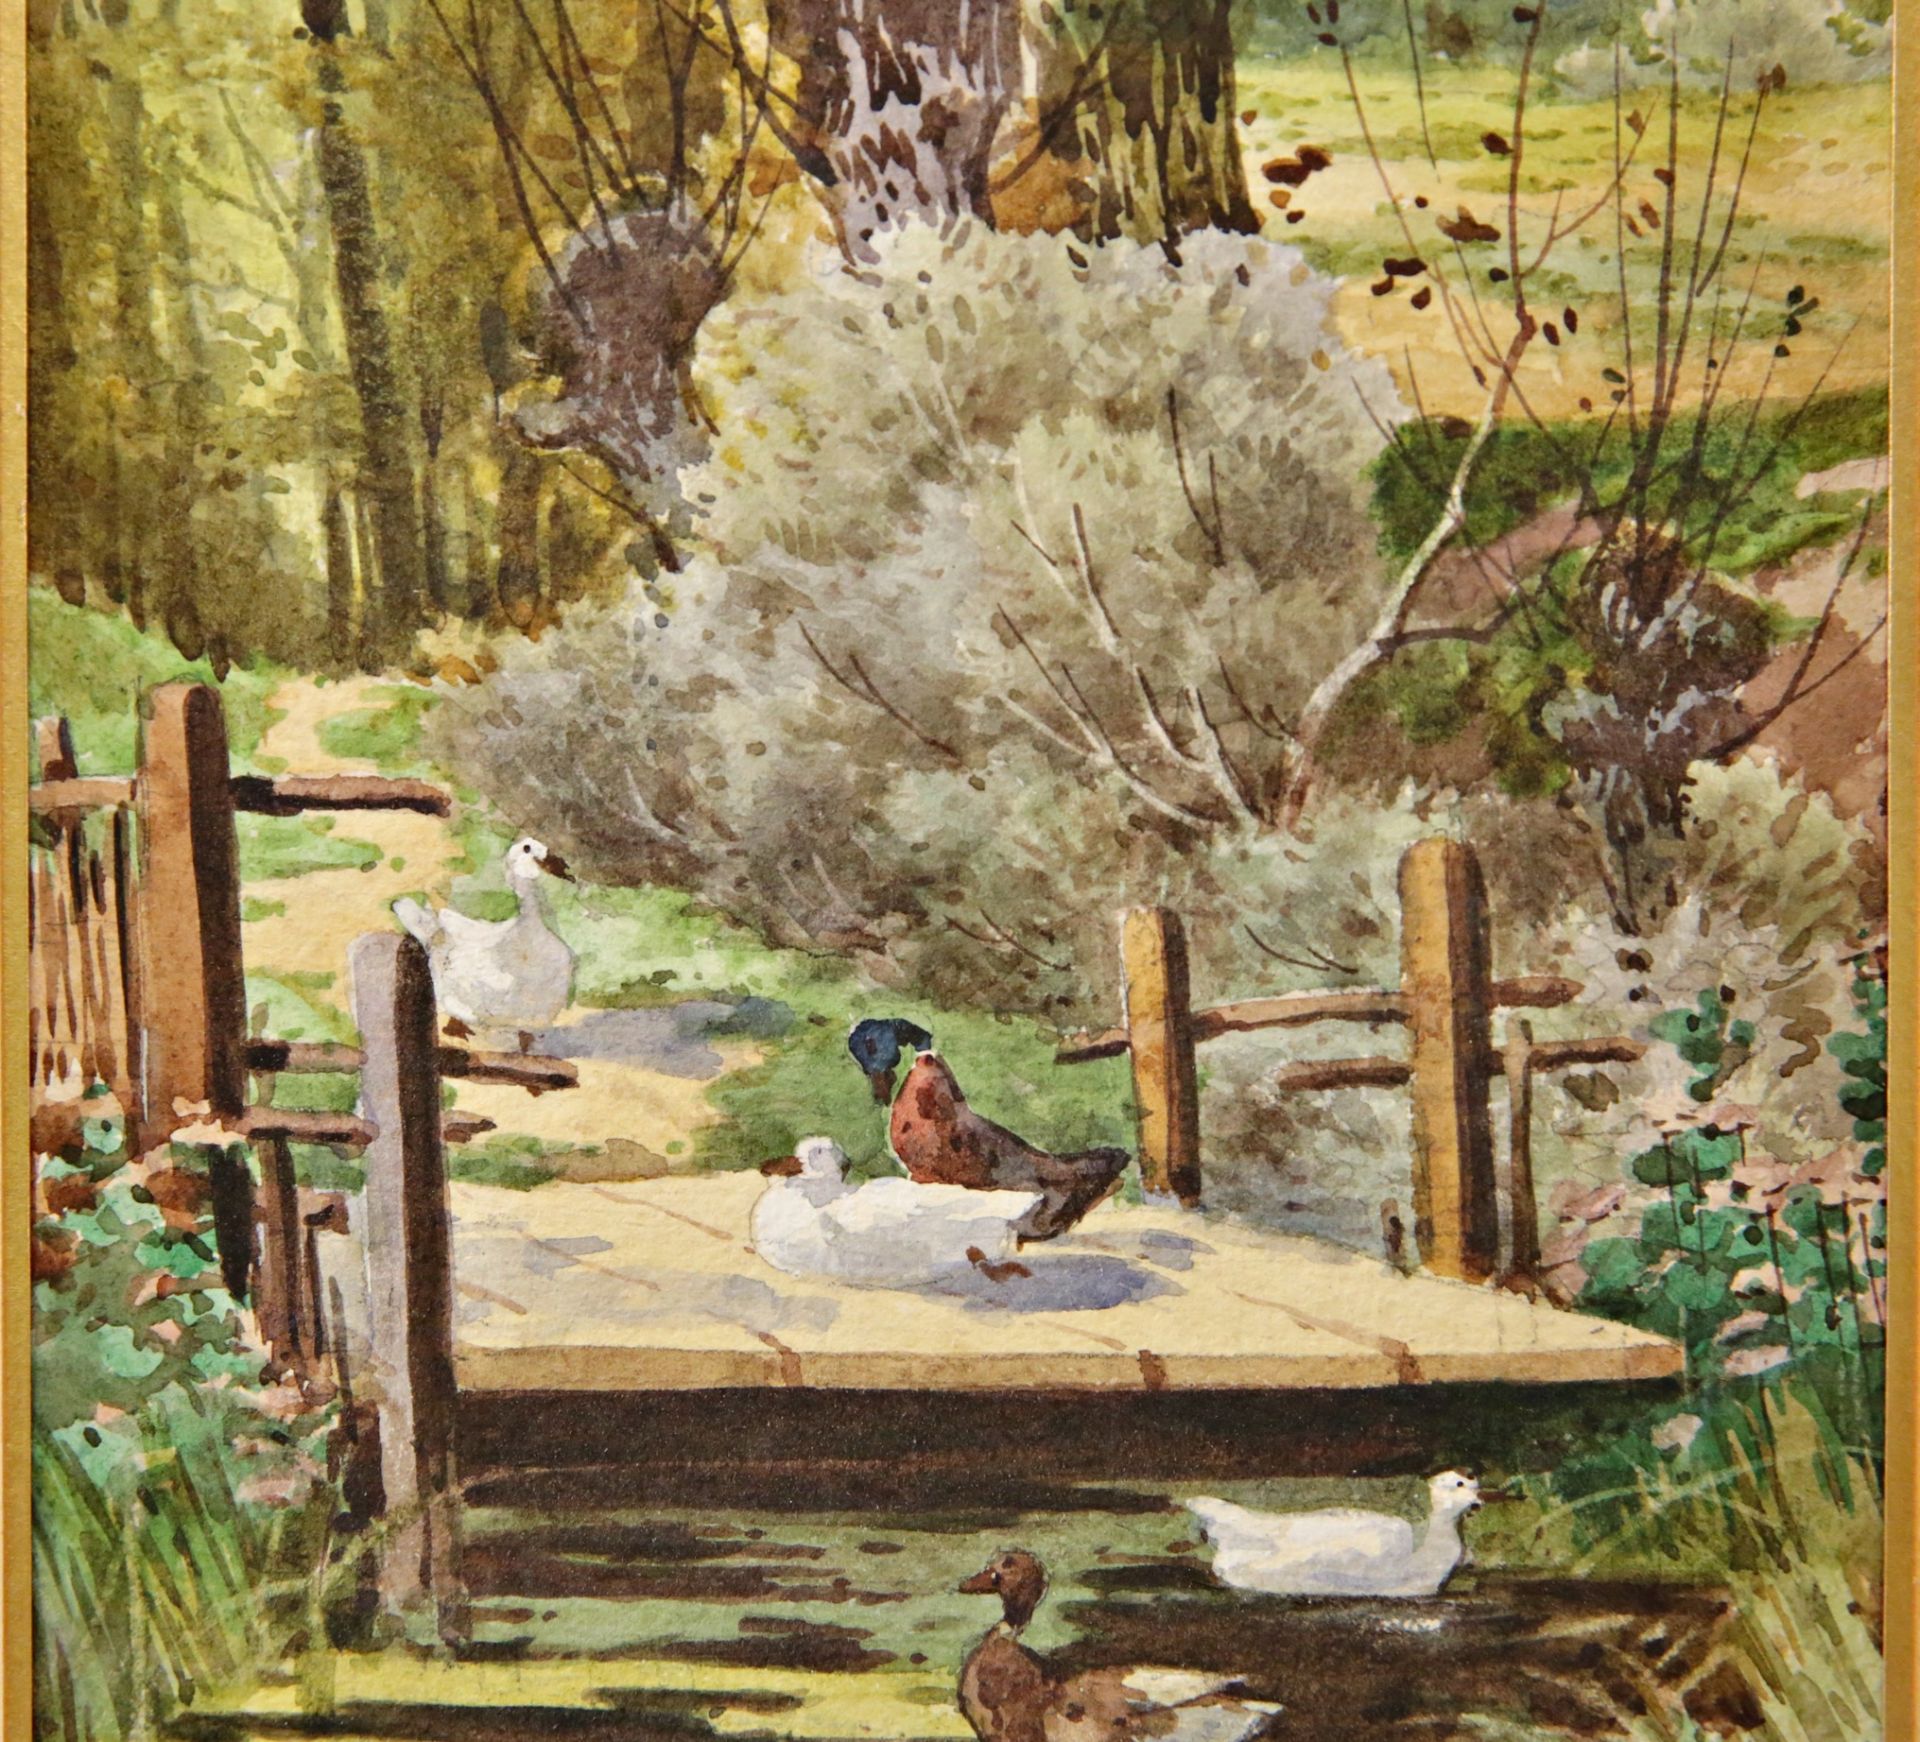 Jules RICHARD (XIX-XX) "A duck pontoon", watercolor on paper, French painting of the 19th-20th centu - Bild 4 aus 6